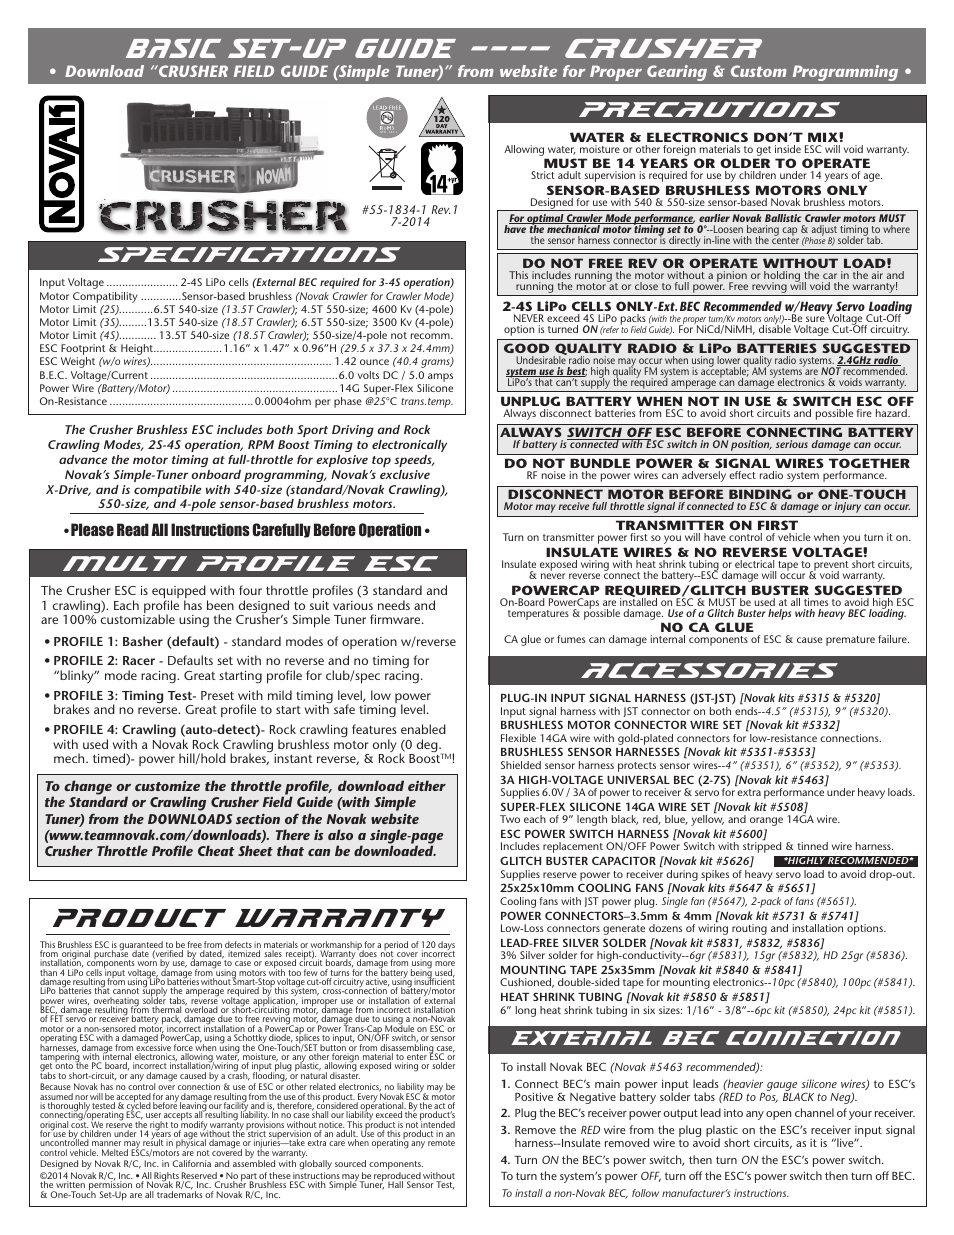 Novak Brushless Speed Control: Crusher Basic Set-Up (w/Simple-Tuner)  (55-1834-1 Rev.1) User Manual | 2 pages